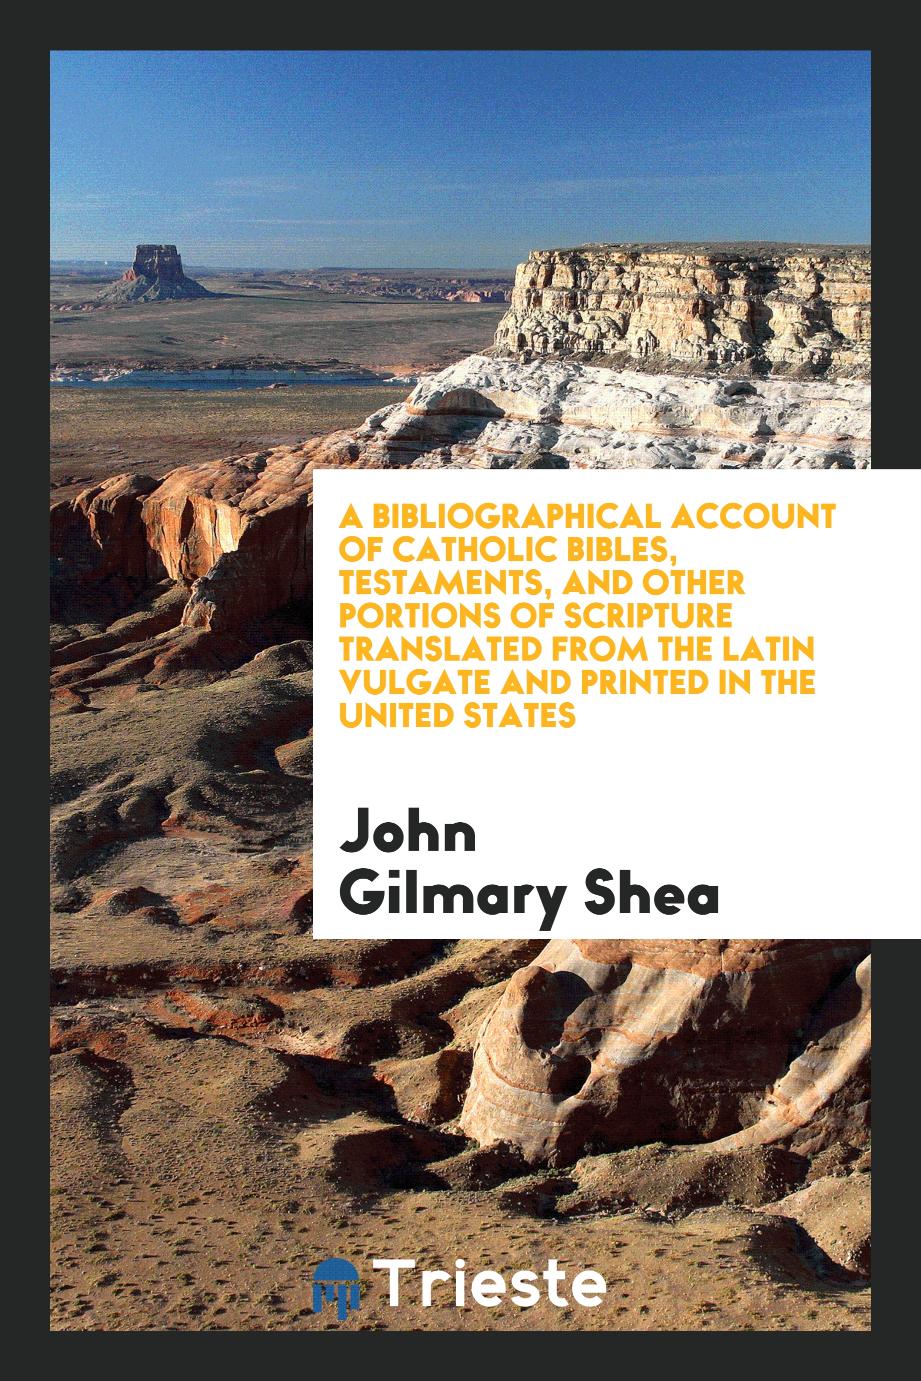 A bibliographical account of Catholic Bibles, Testaments, and other portions of Scripture translated from the Latin Vulgate and printed in the United States